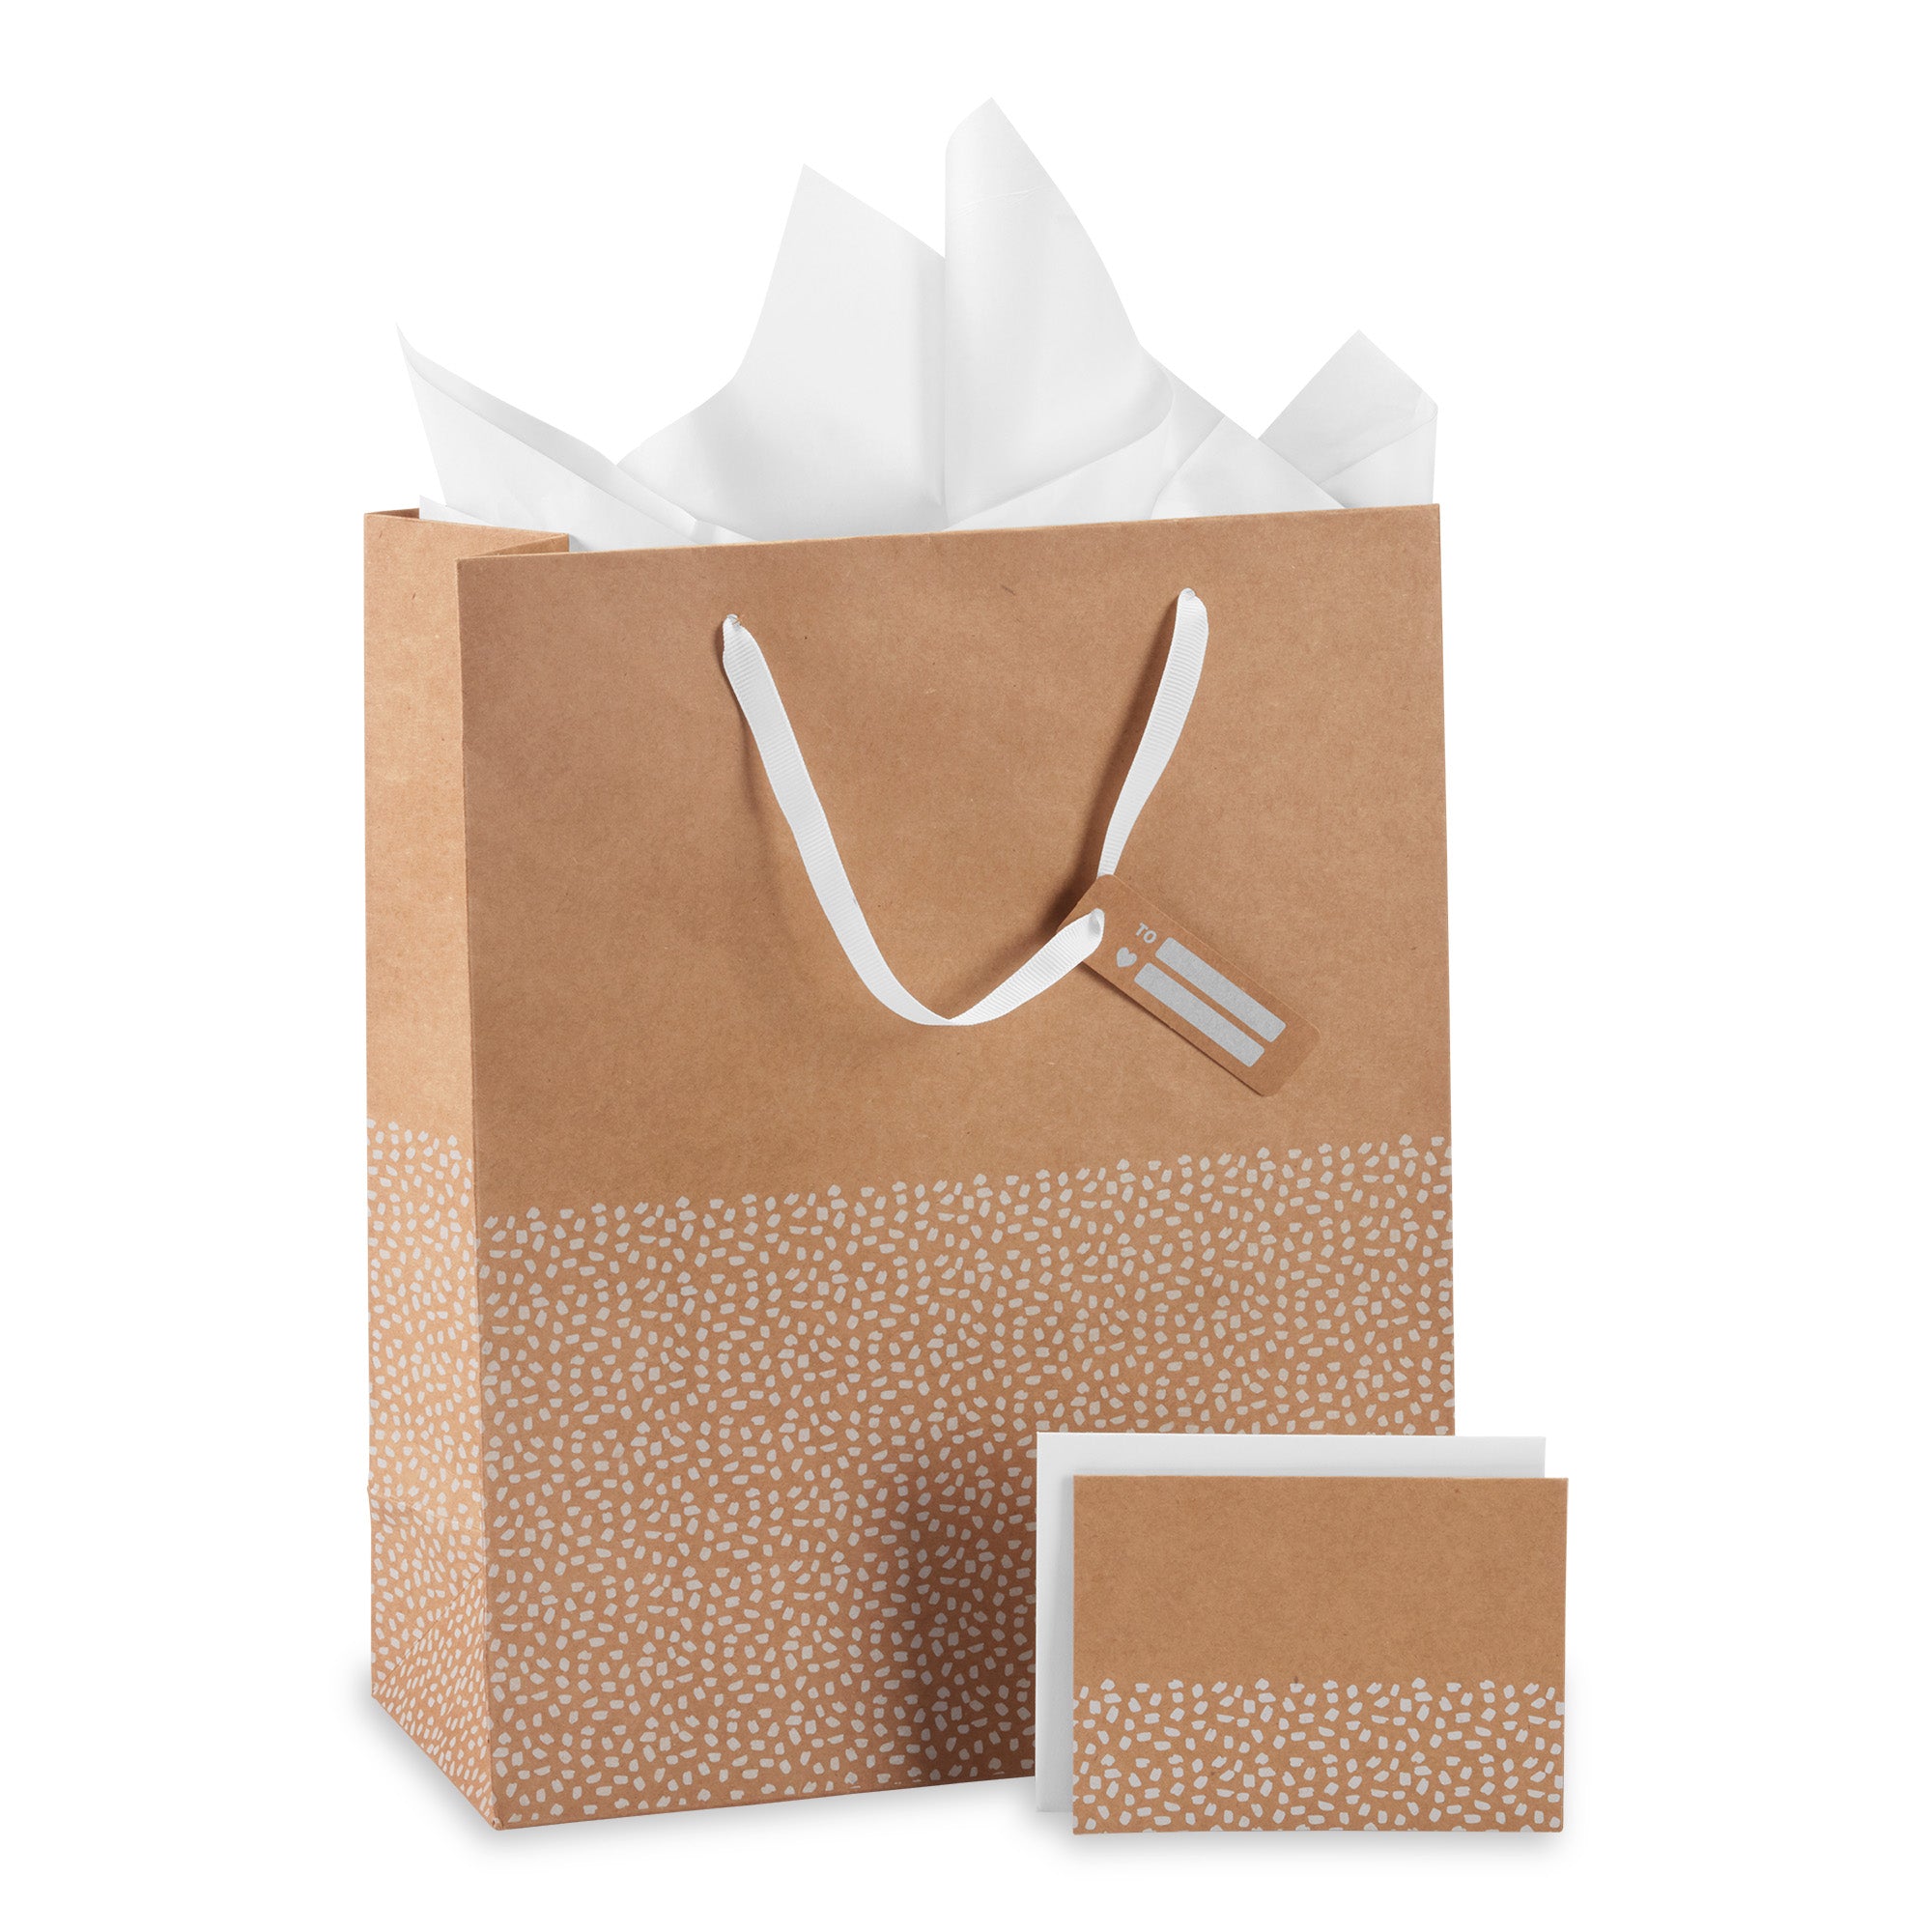 Brown paper gift bag with white ink printed details on the bottom portion.  Includes tissue paper, to-from tag, and note with envelope.